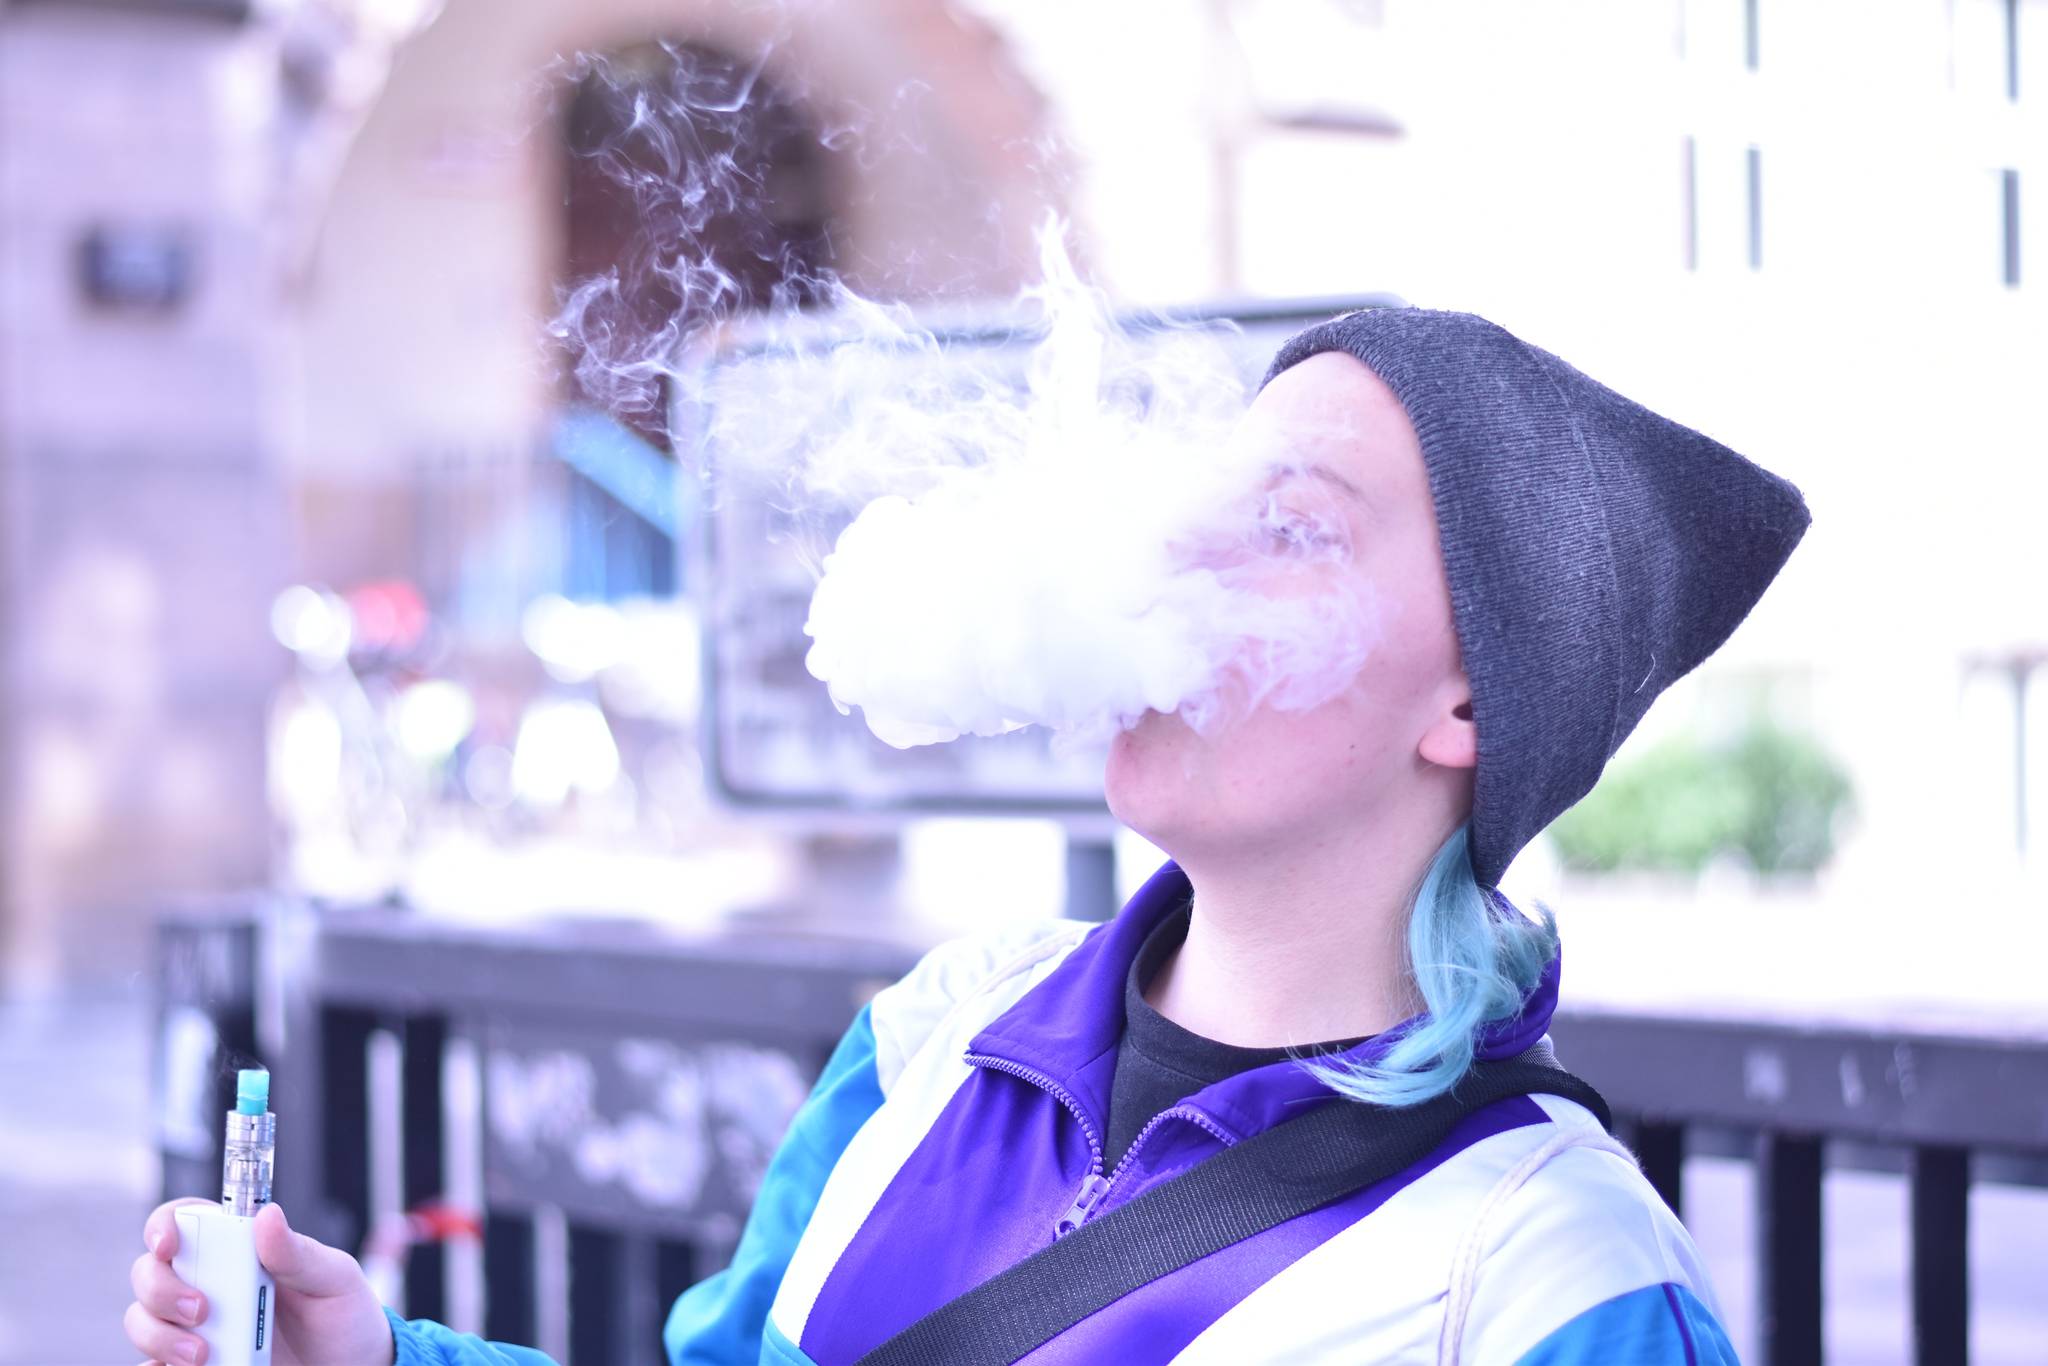 Vapers: a community built around quitting smoking